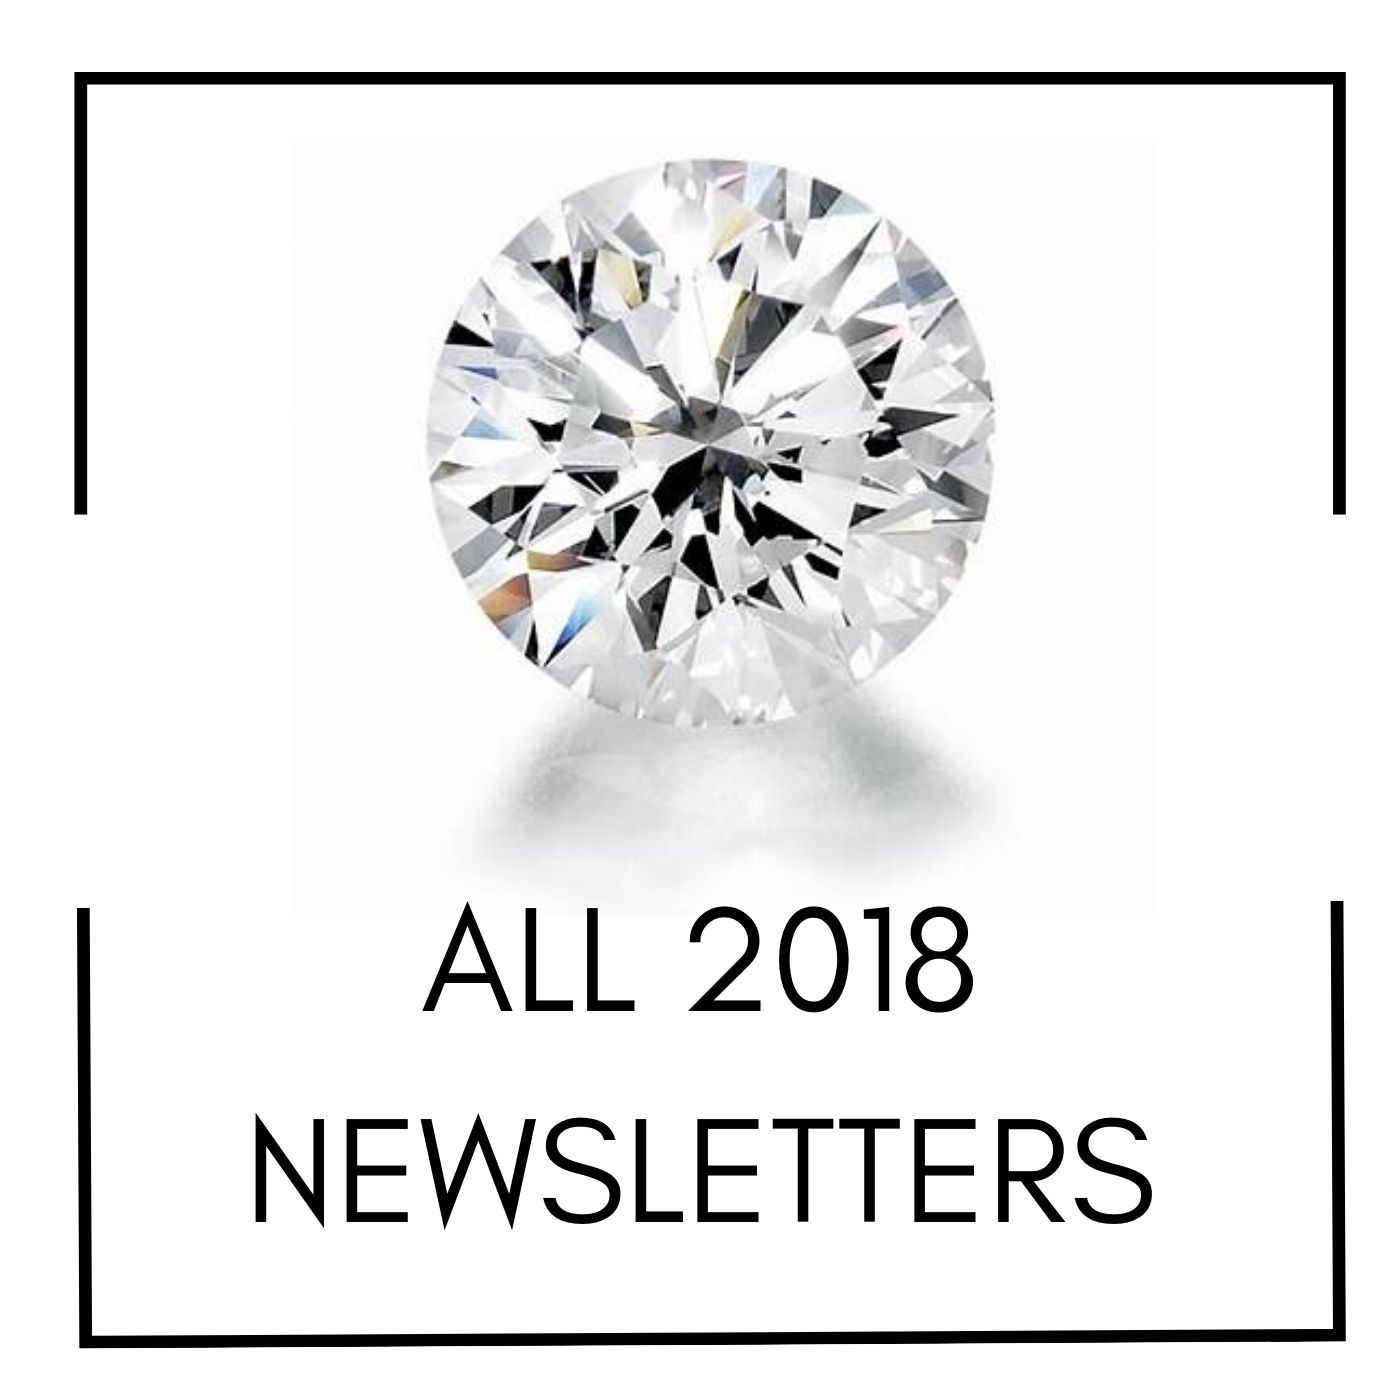 All 2018 Newsletters